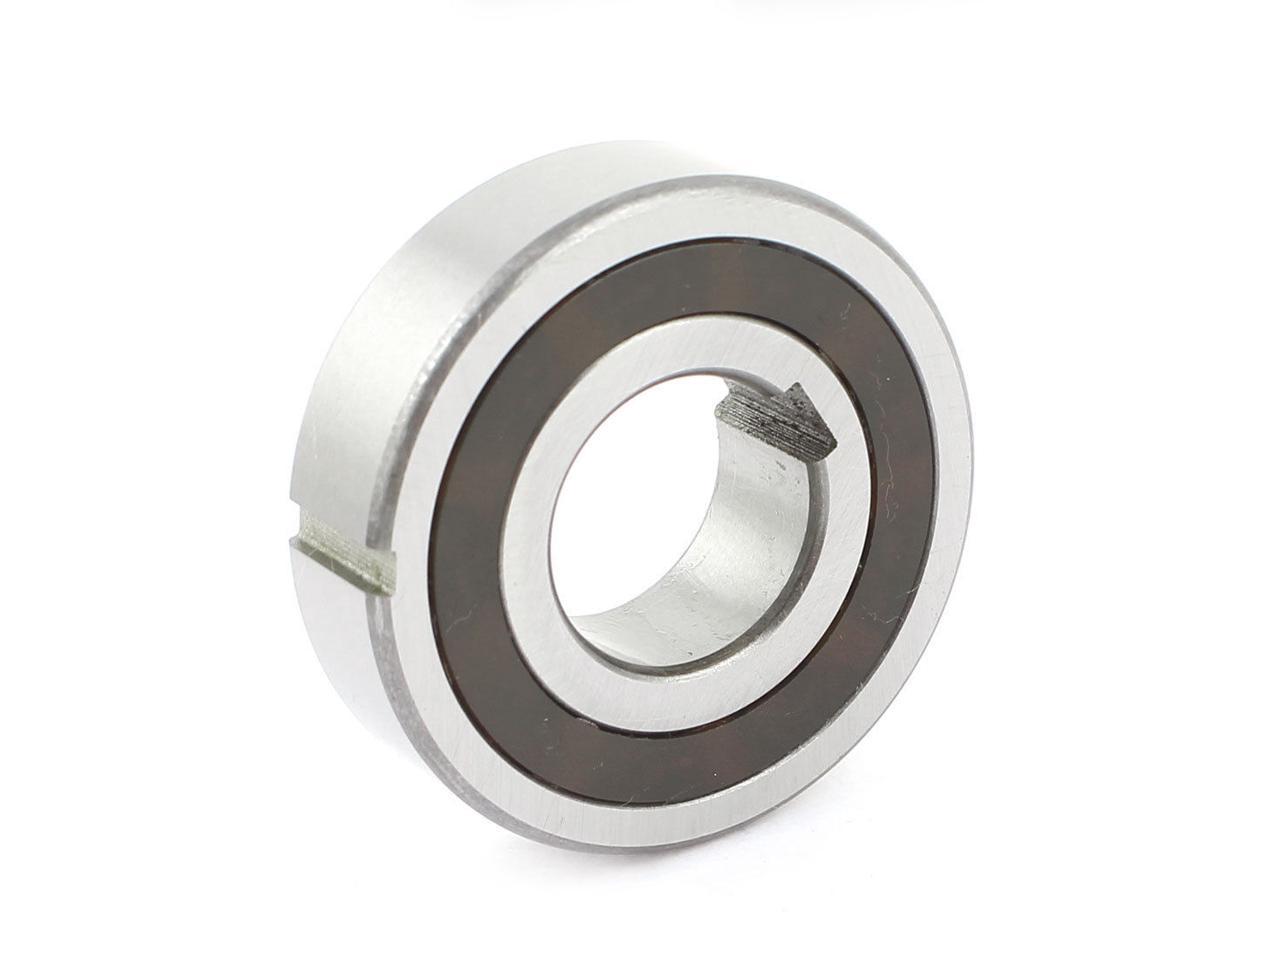 New 1pcs CSK12PP 12*32*10mm One way Dual keyway Bearing inner and outer keyway 